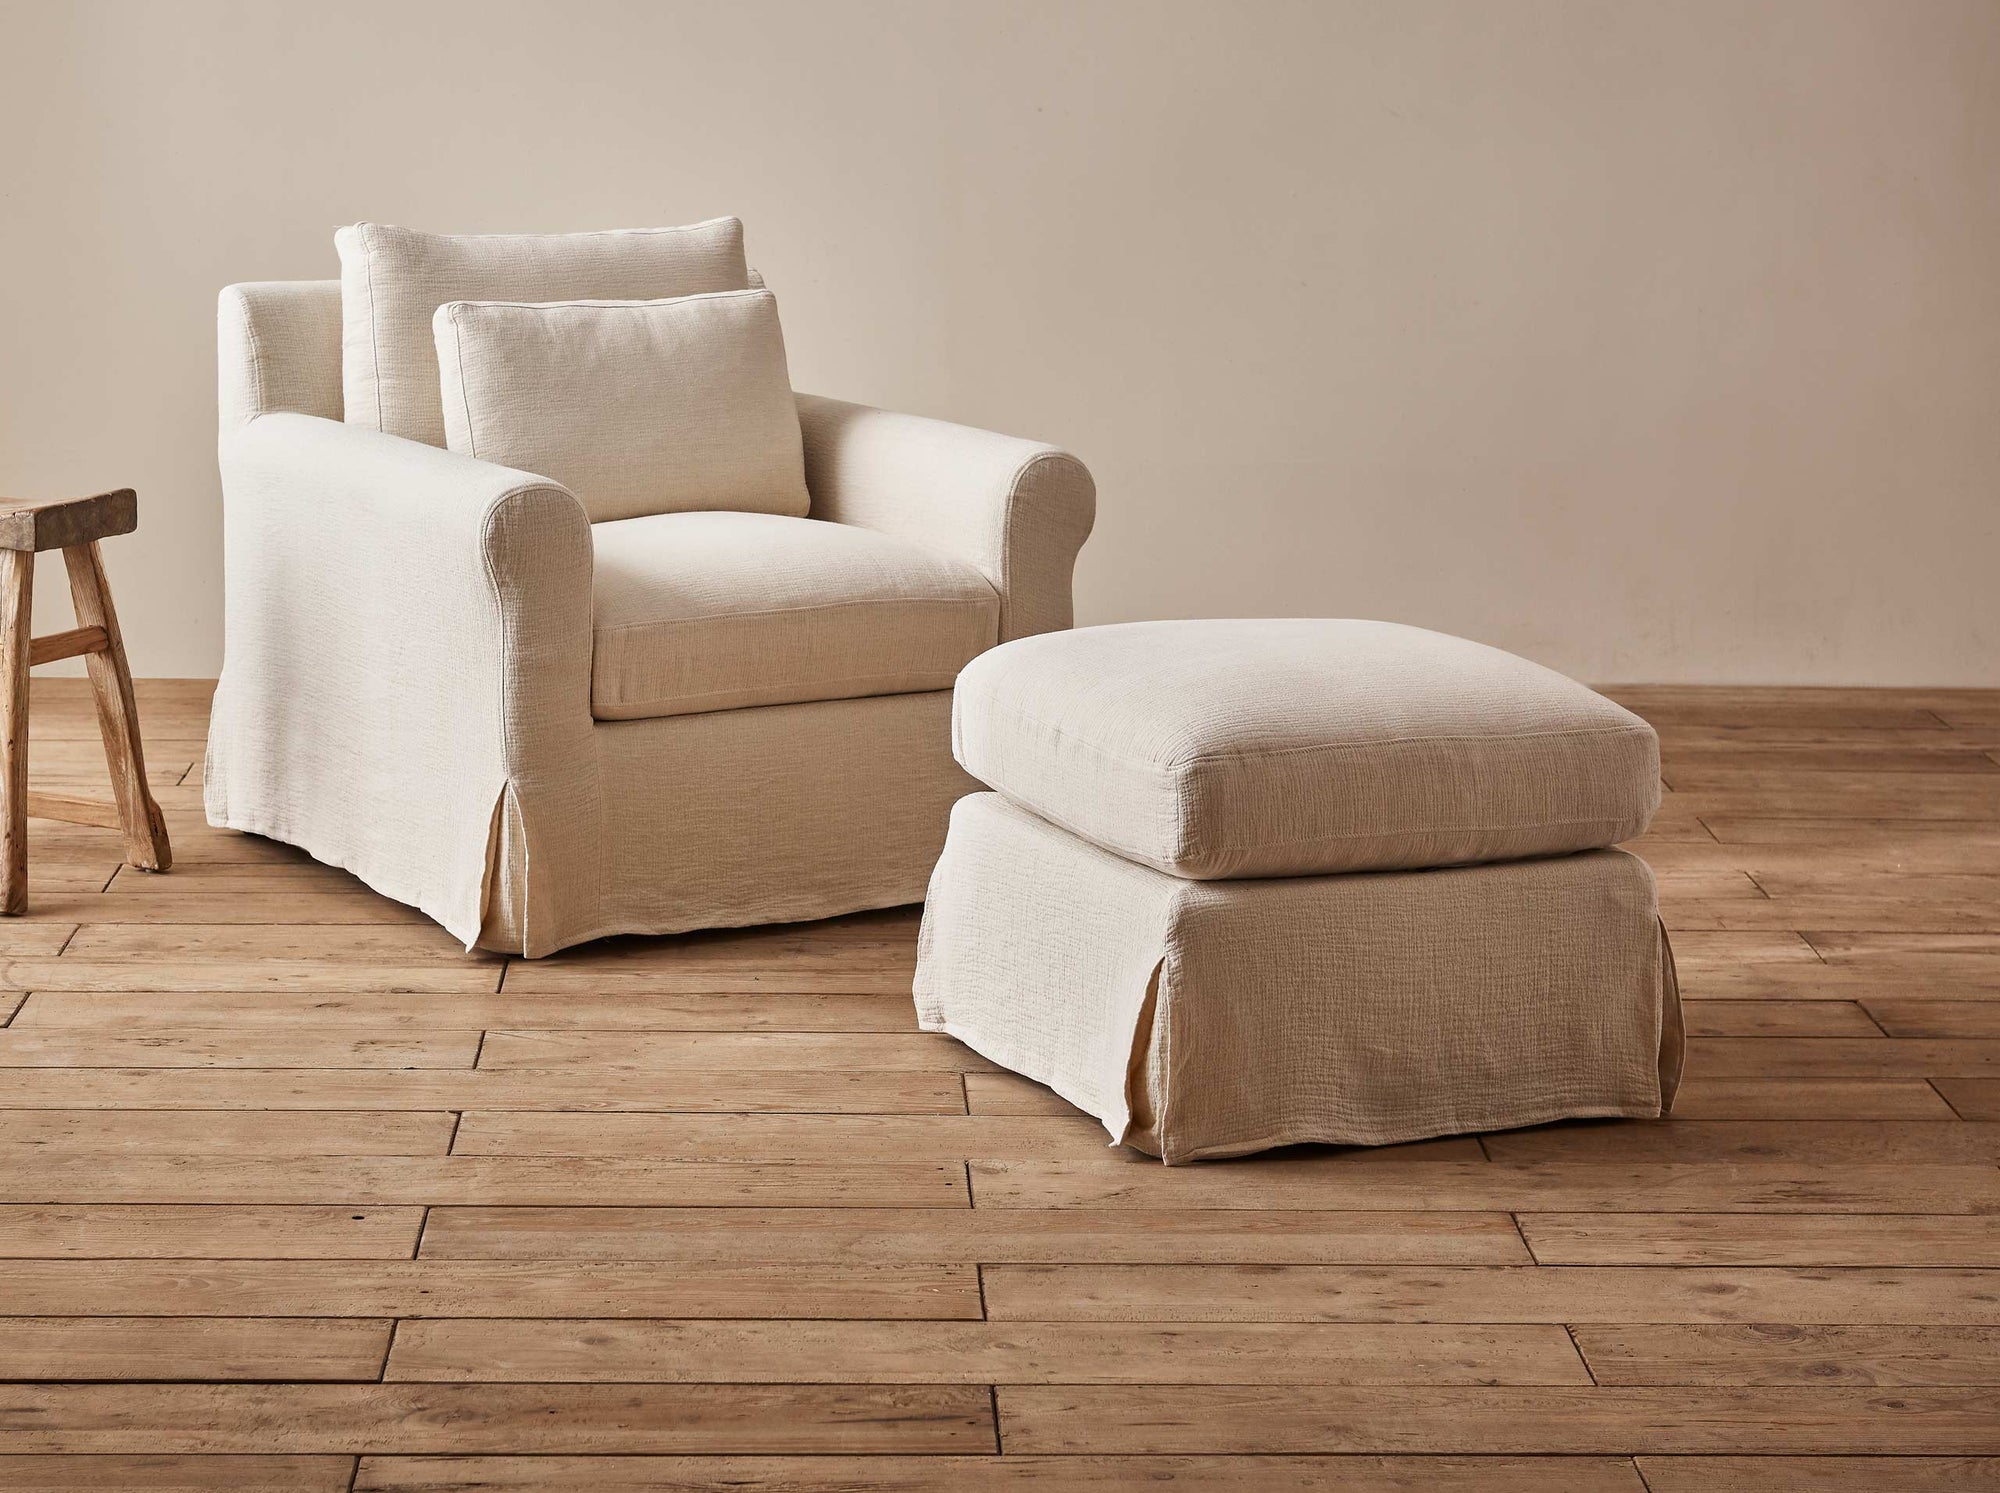 Elias Chair Ottoman in Corn Silk, a light beige Washed Cotton Linen, placed in a room with a matching Elias Chair